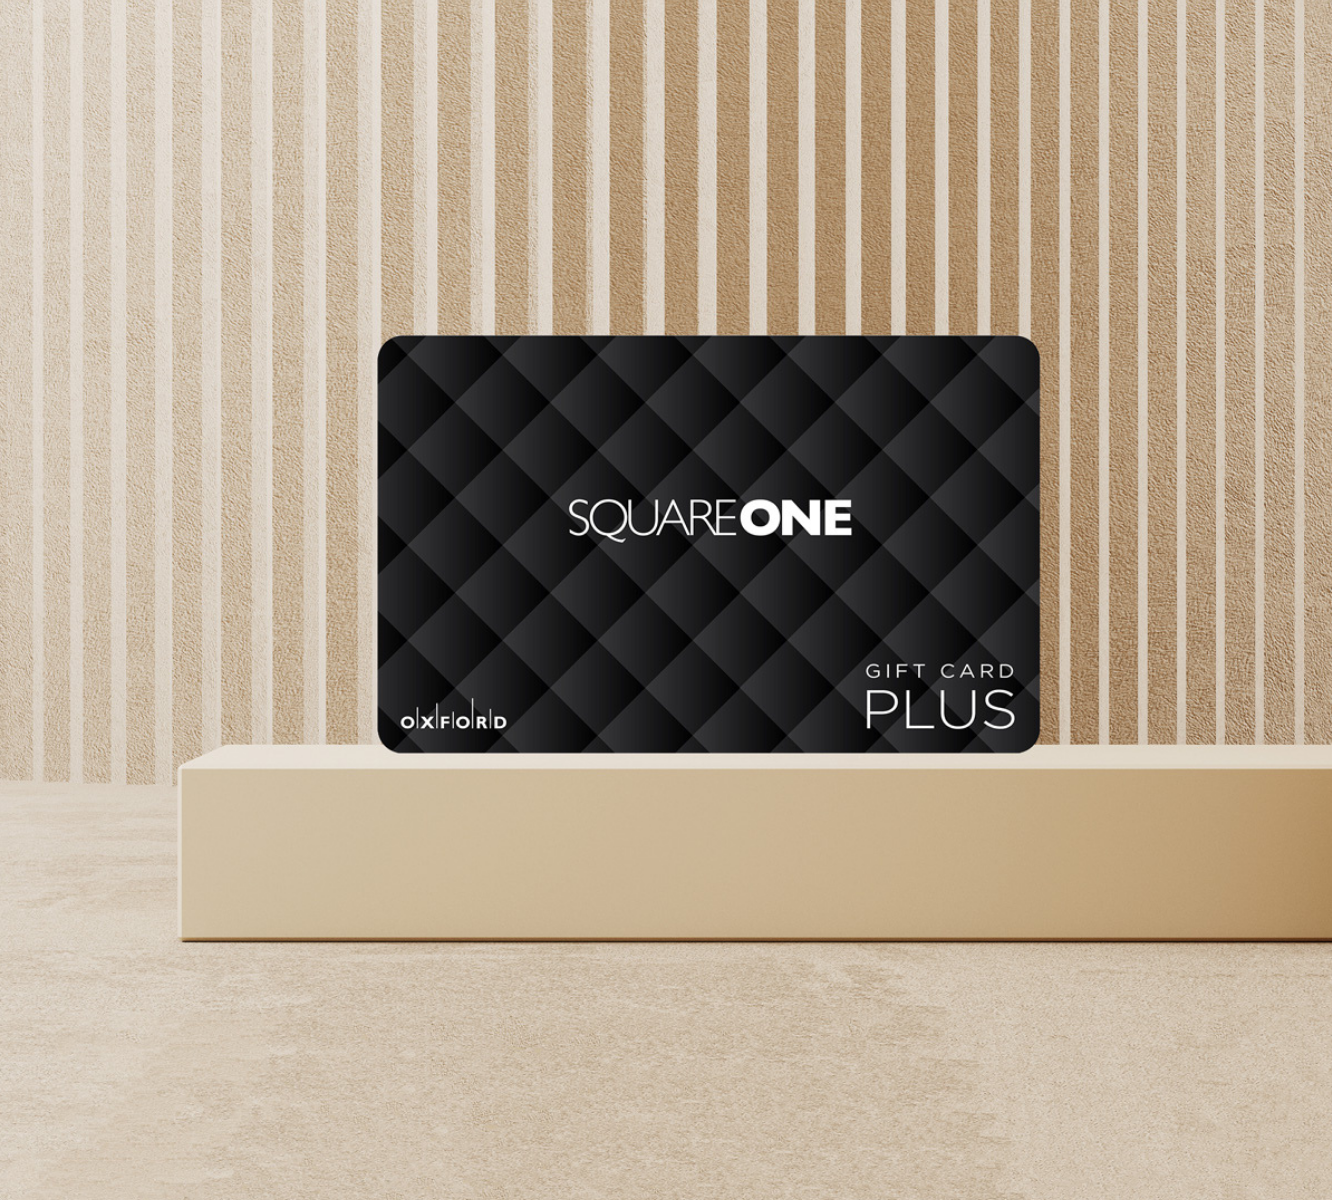 Image of a Black Square One gift card perched on a beige podium with a beige background.